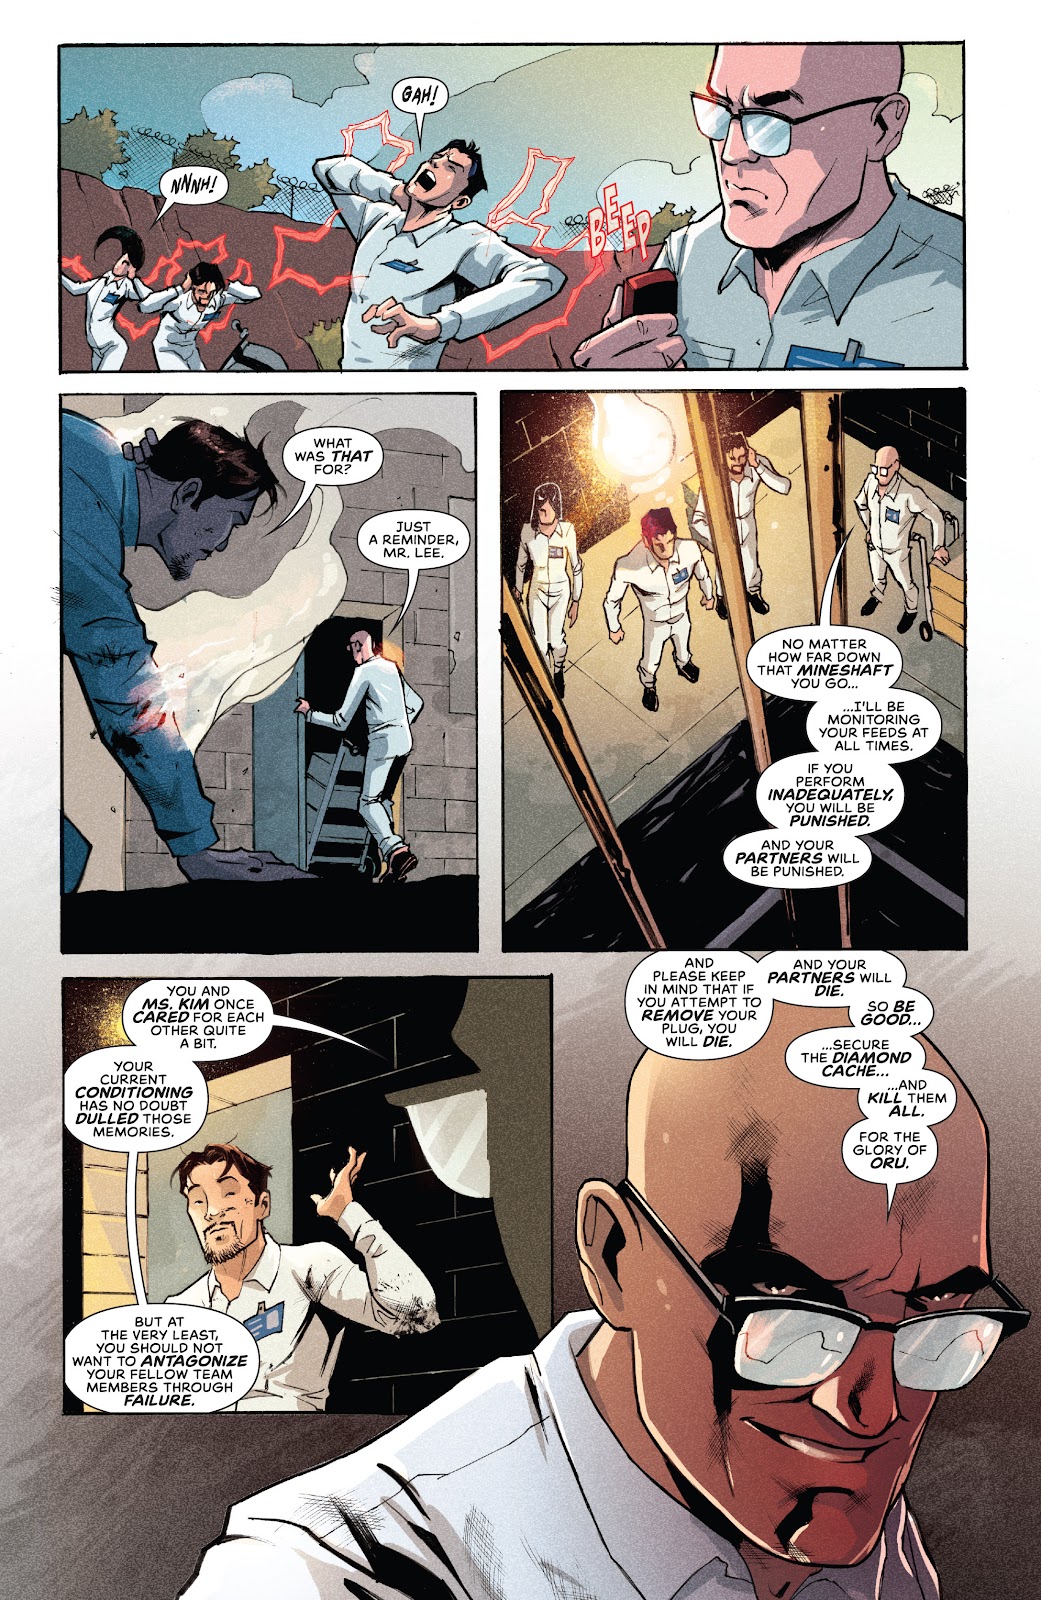 James Bond: 007 issue 9 - Page 6